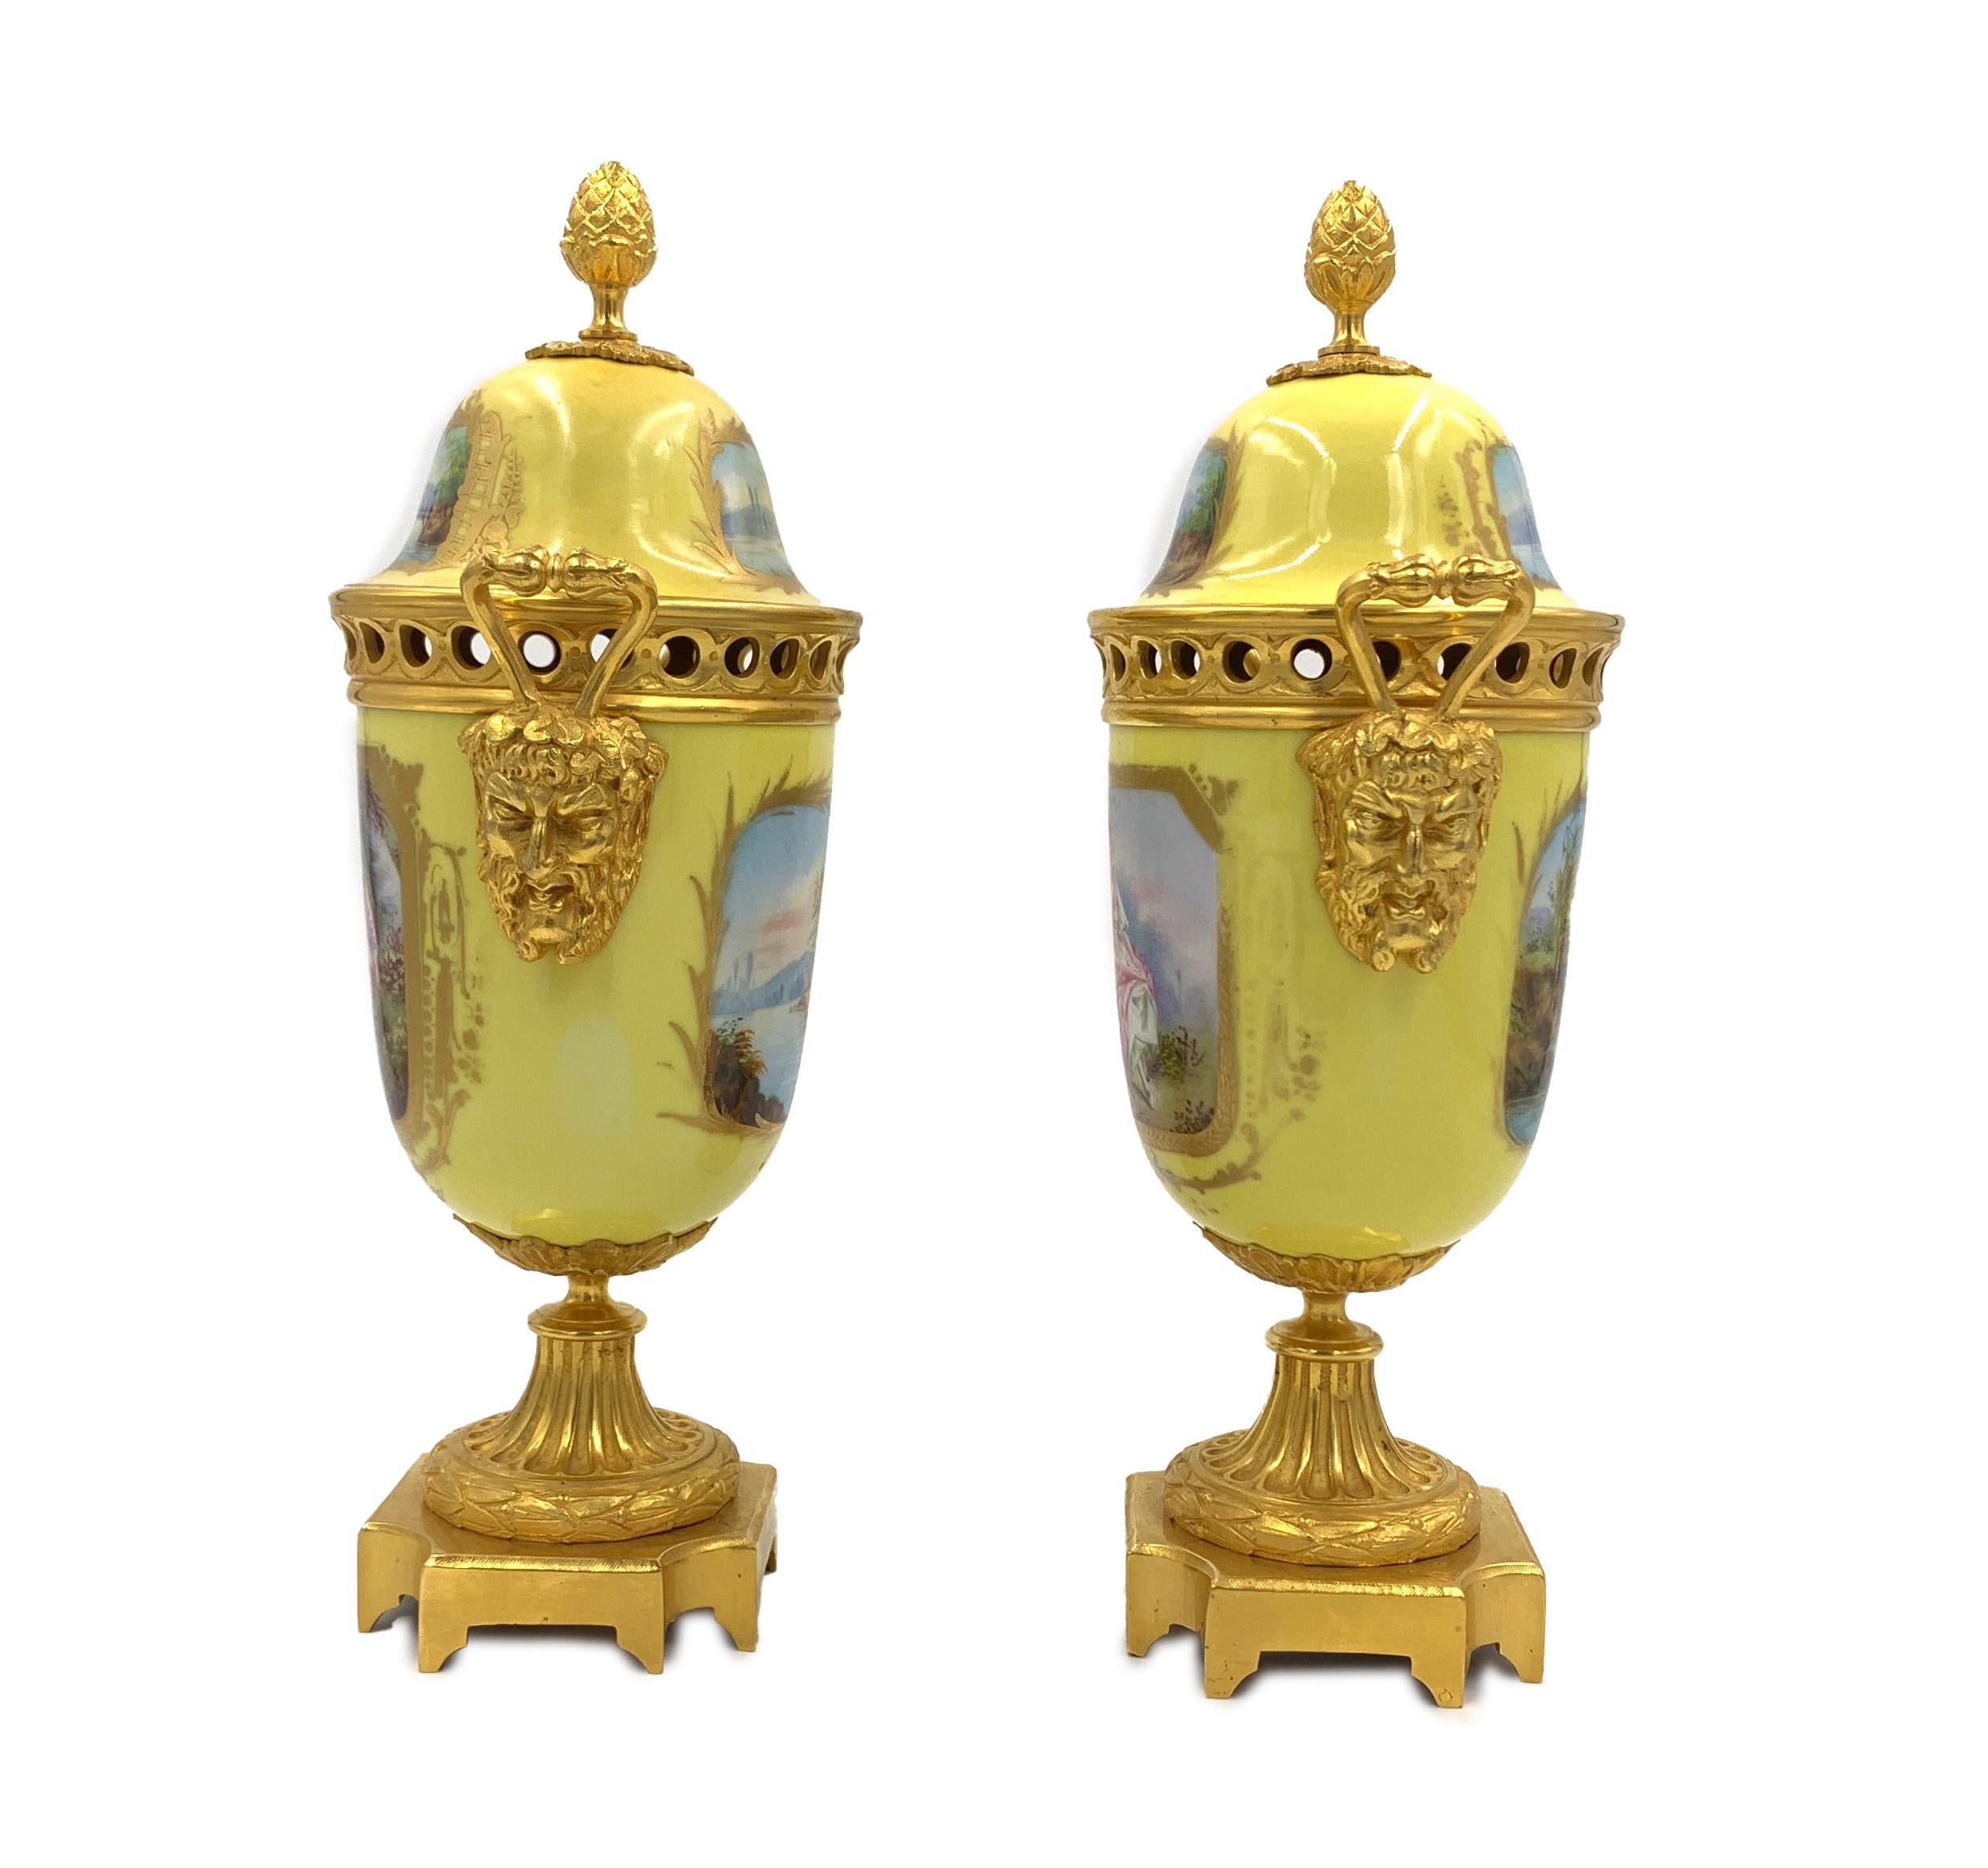 Pair of 19th century Sevres style porcelain and gilt metal vases, the front of the vases decorated with romantic scenes while the reverse and the lids decorated with river scenes, Each vase stands on a square ormolu base.
 